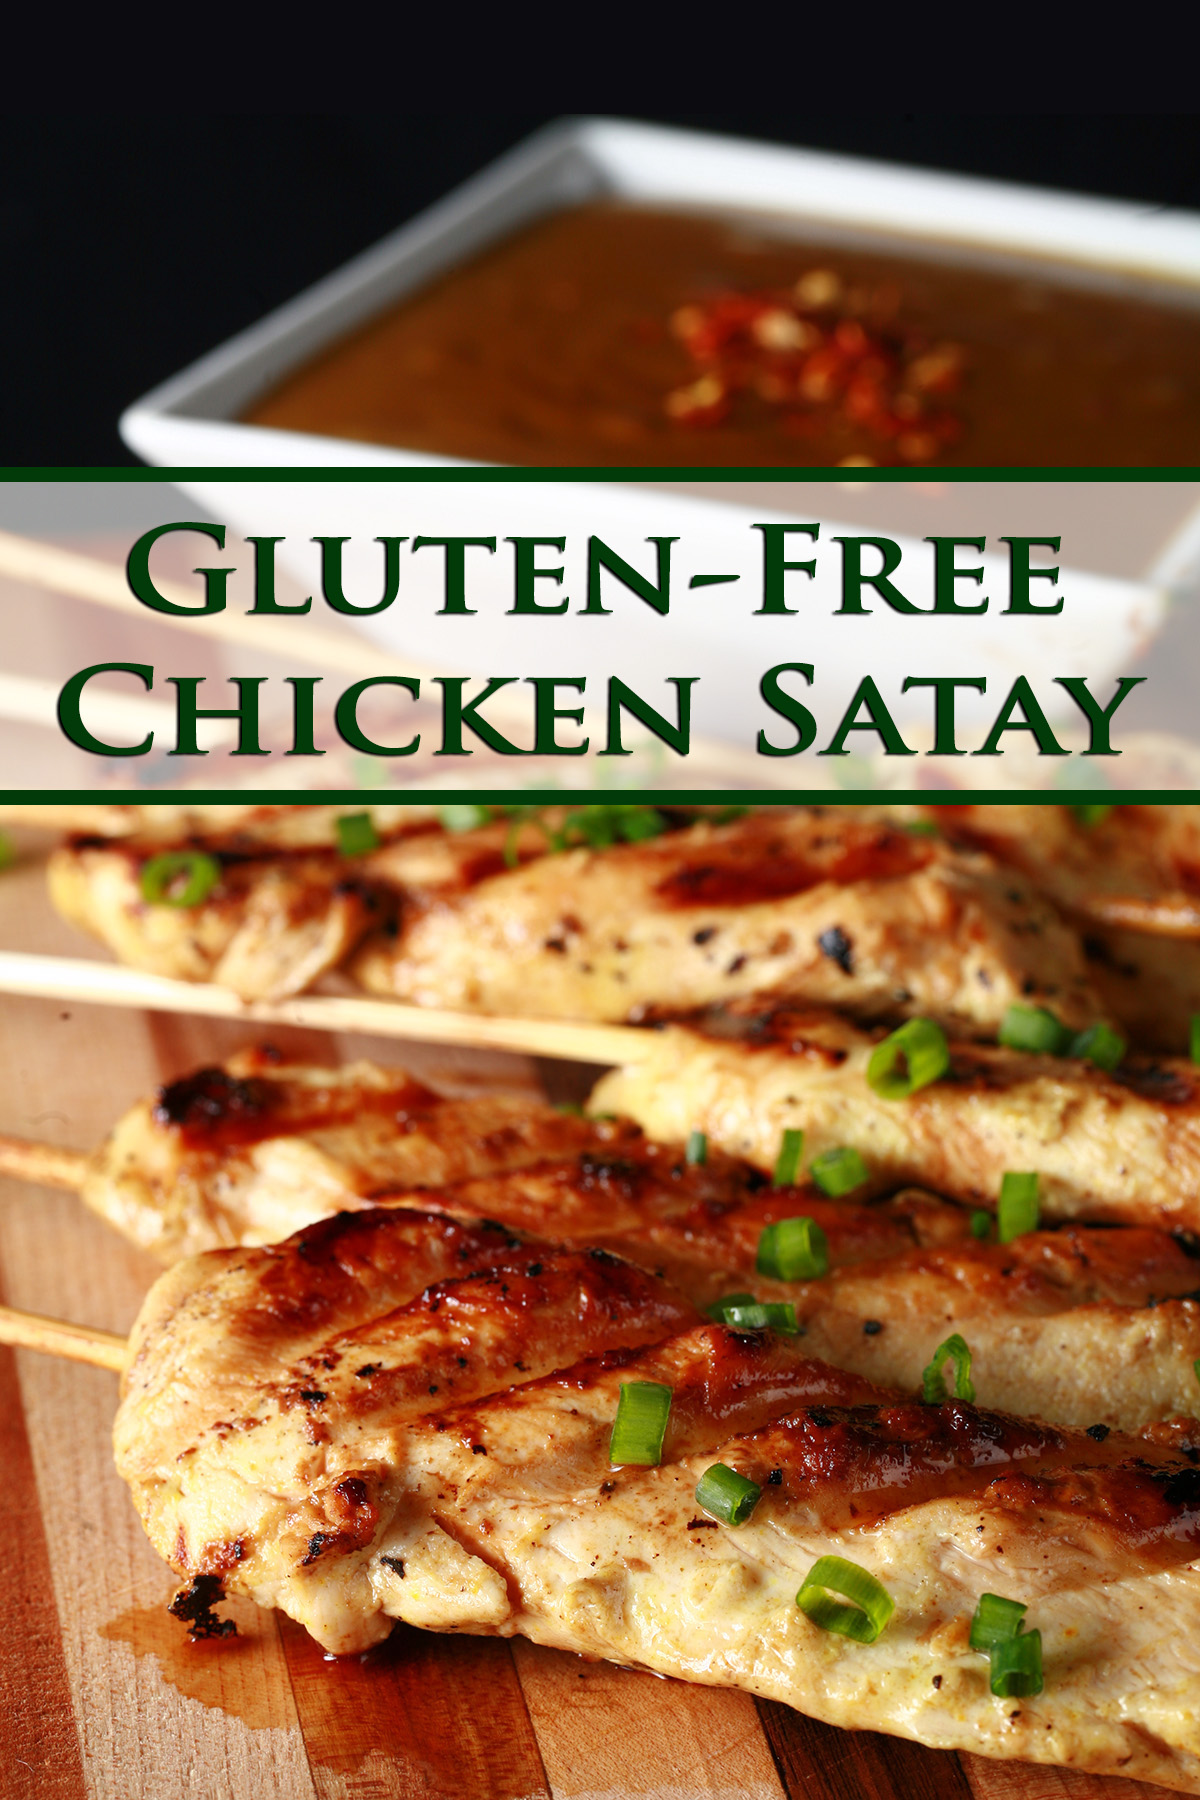 Several skewers of gluten-free chicken satay on a striped cutting board.  They are sprinkled with green onions and sitting next to a bowl of peanut sauce.